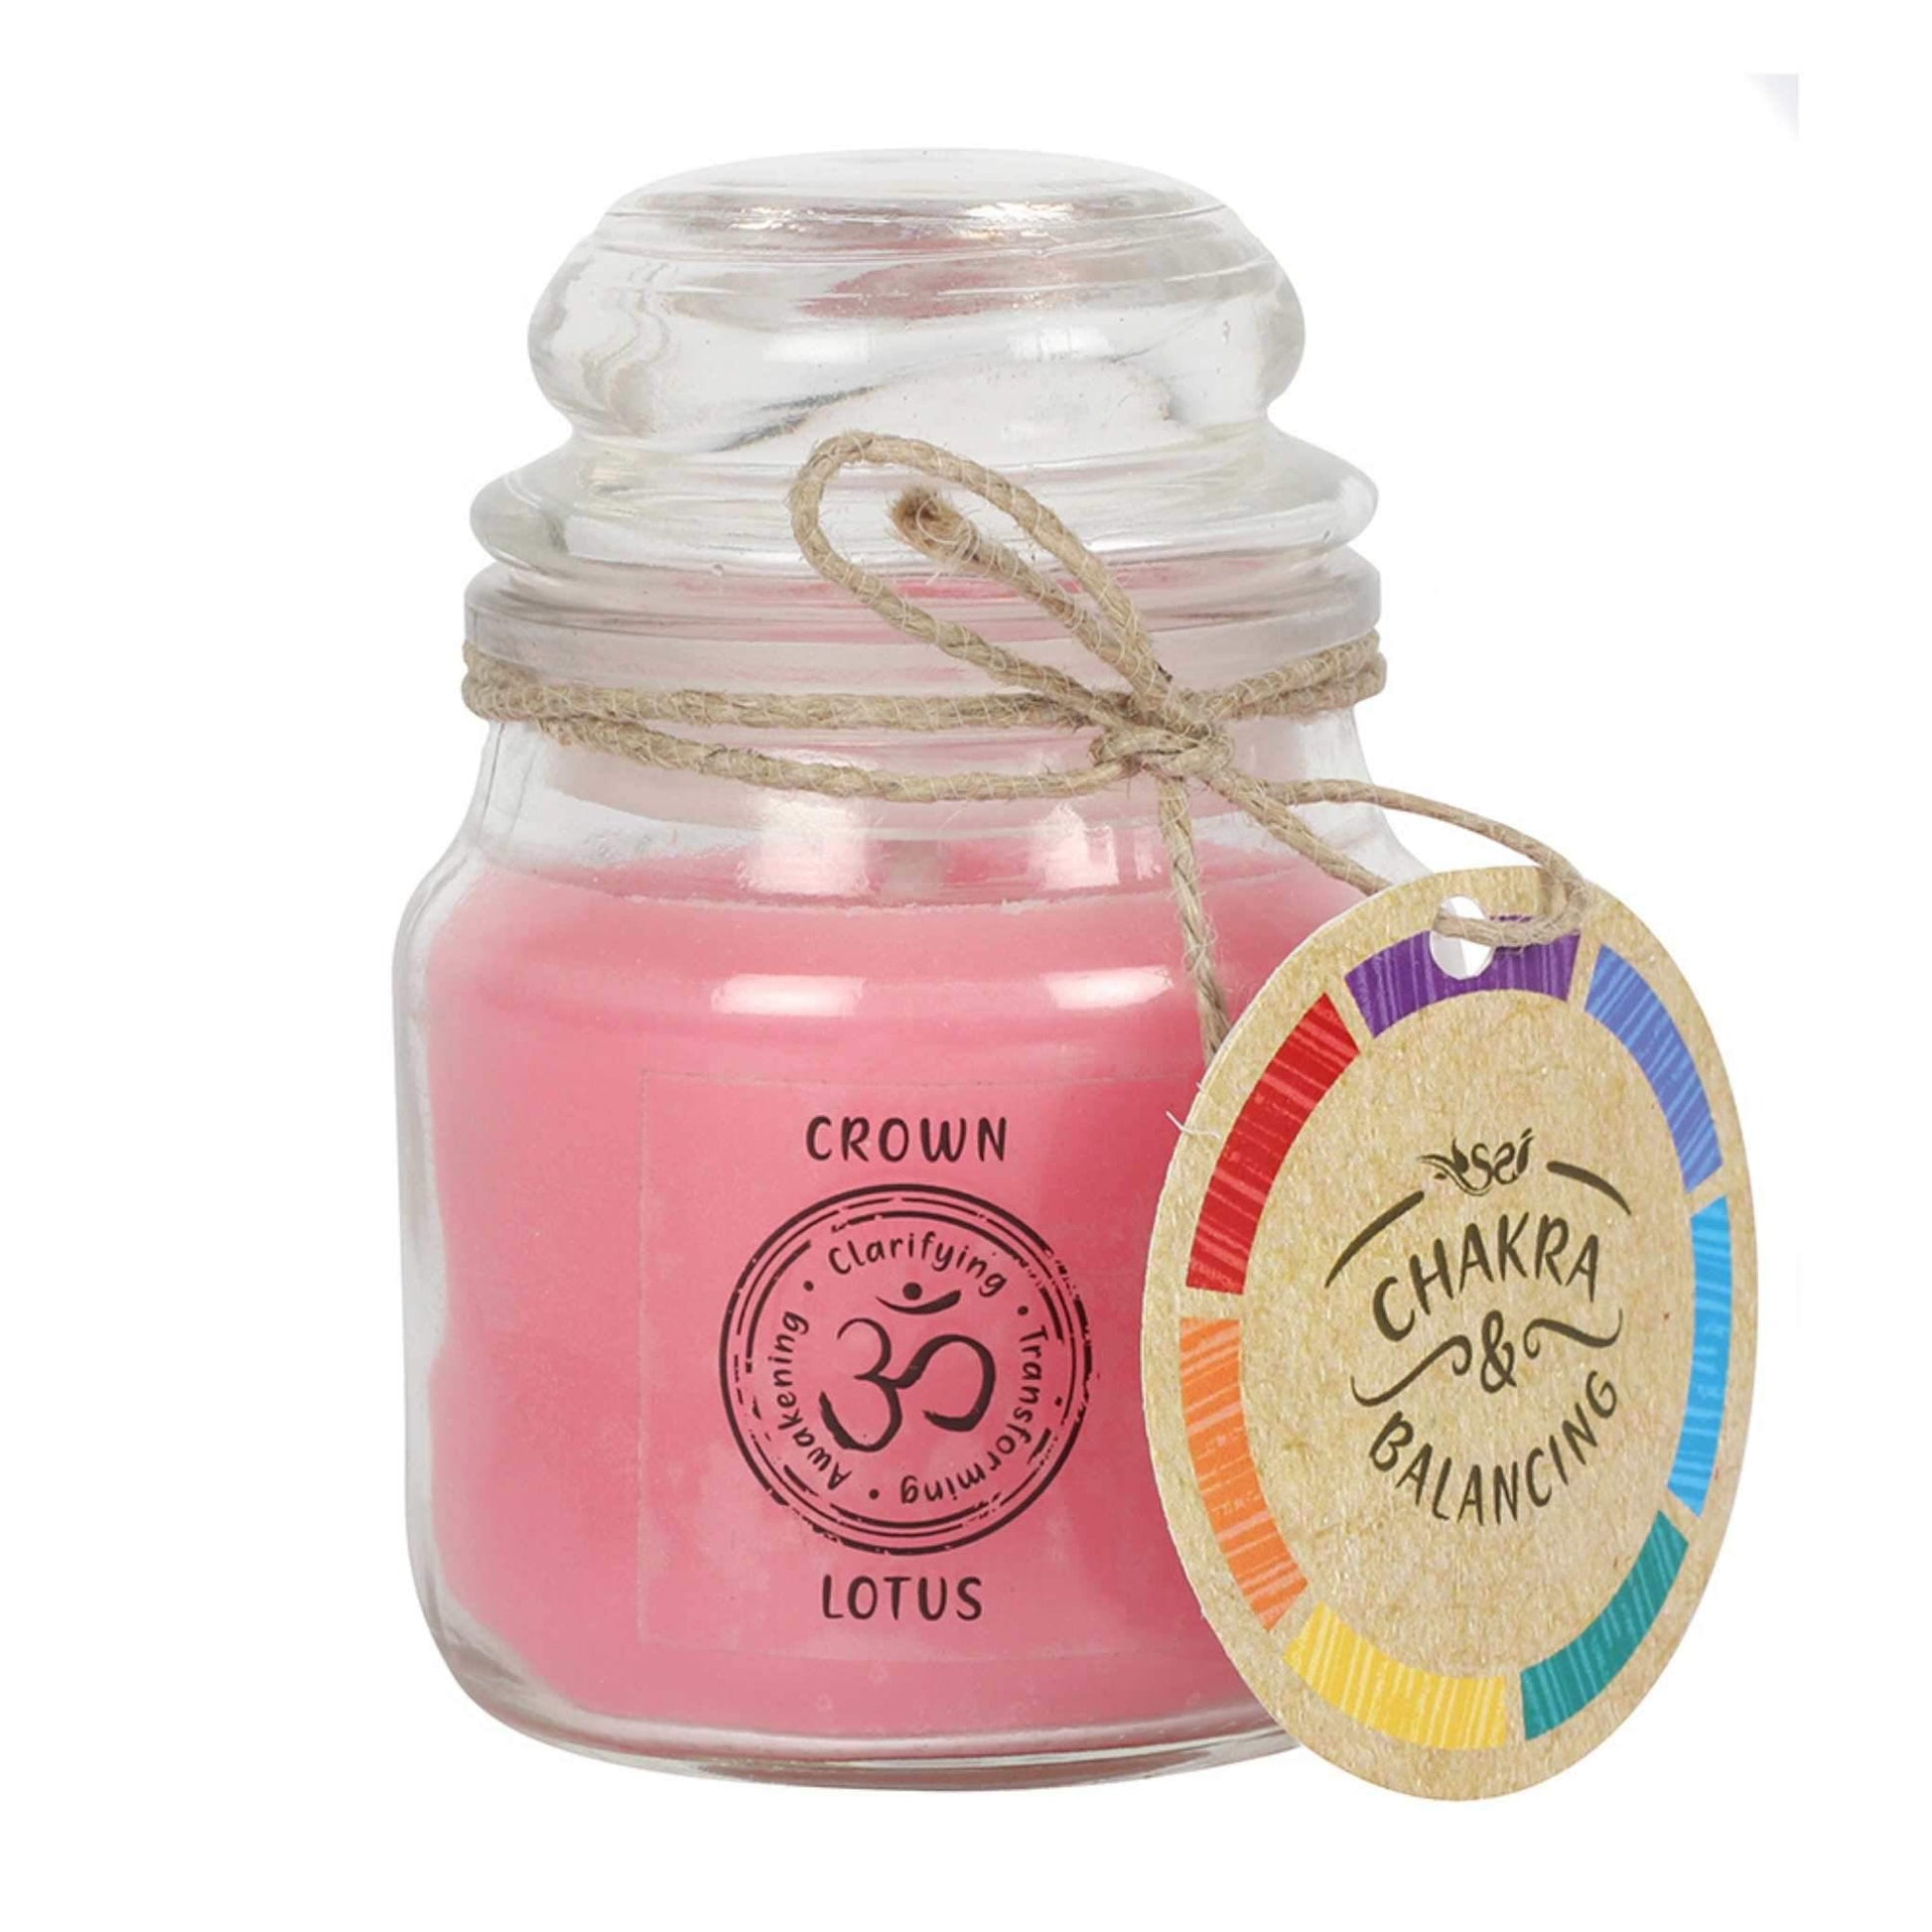 Balancing Chakra Candle in a min glass jar with stopper. Tied with a label that says Chakra Balancing. Candle is pink with a label on the jar that says Crown - Lotus